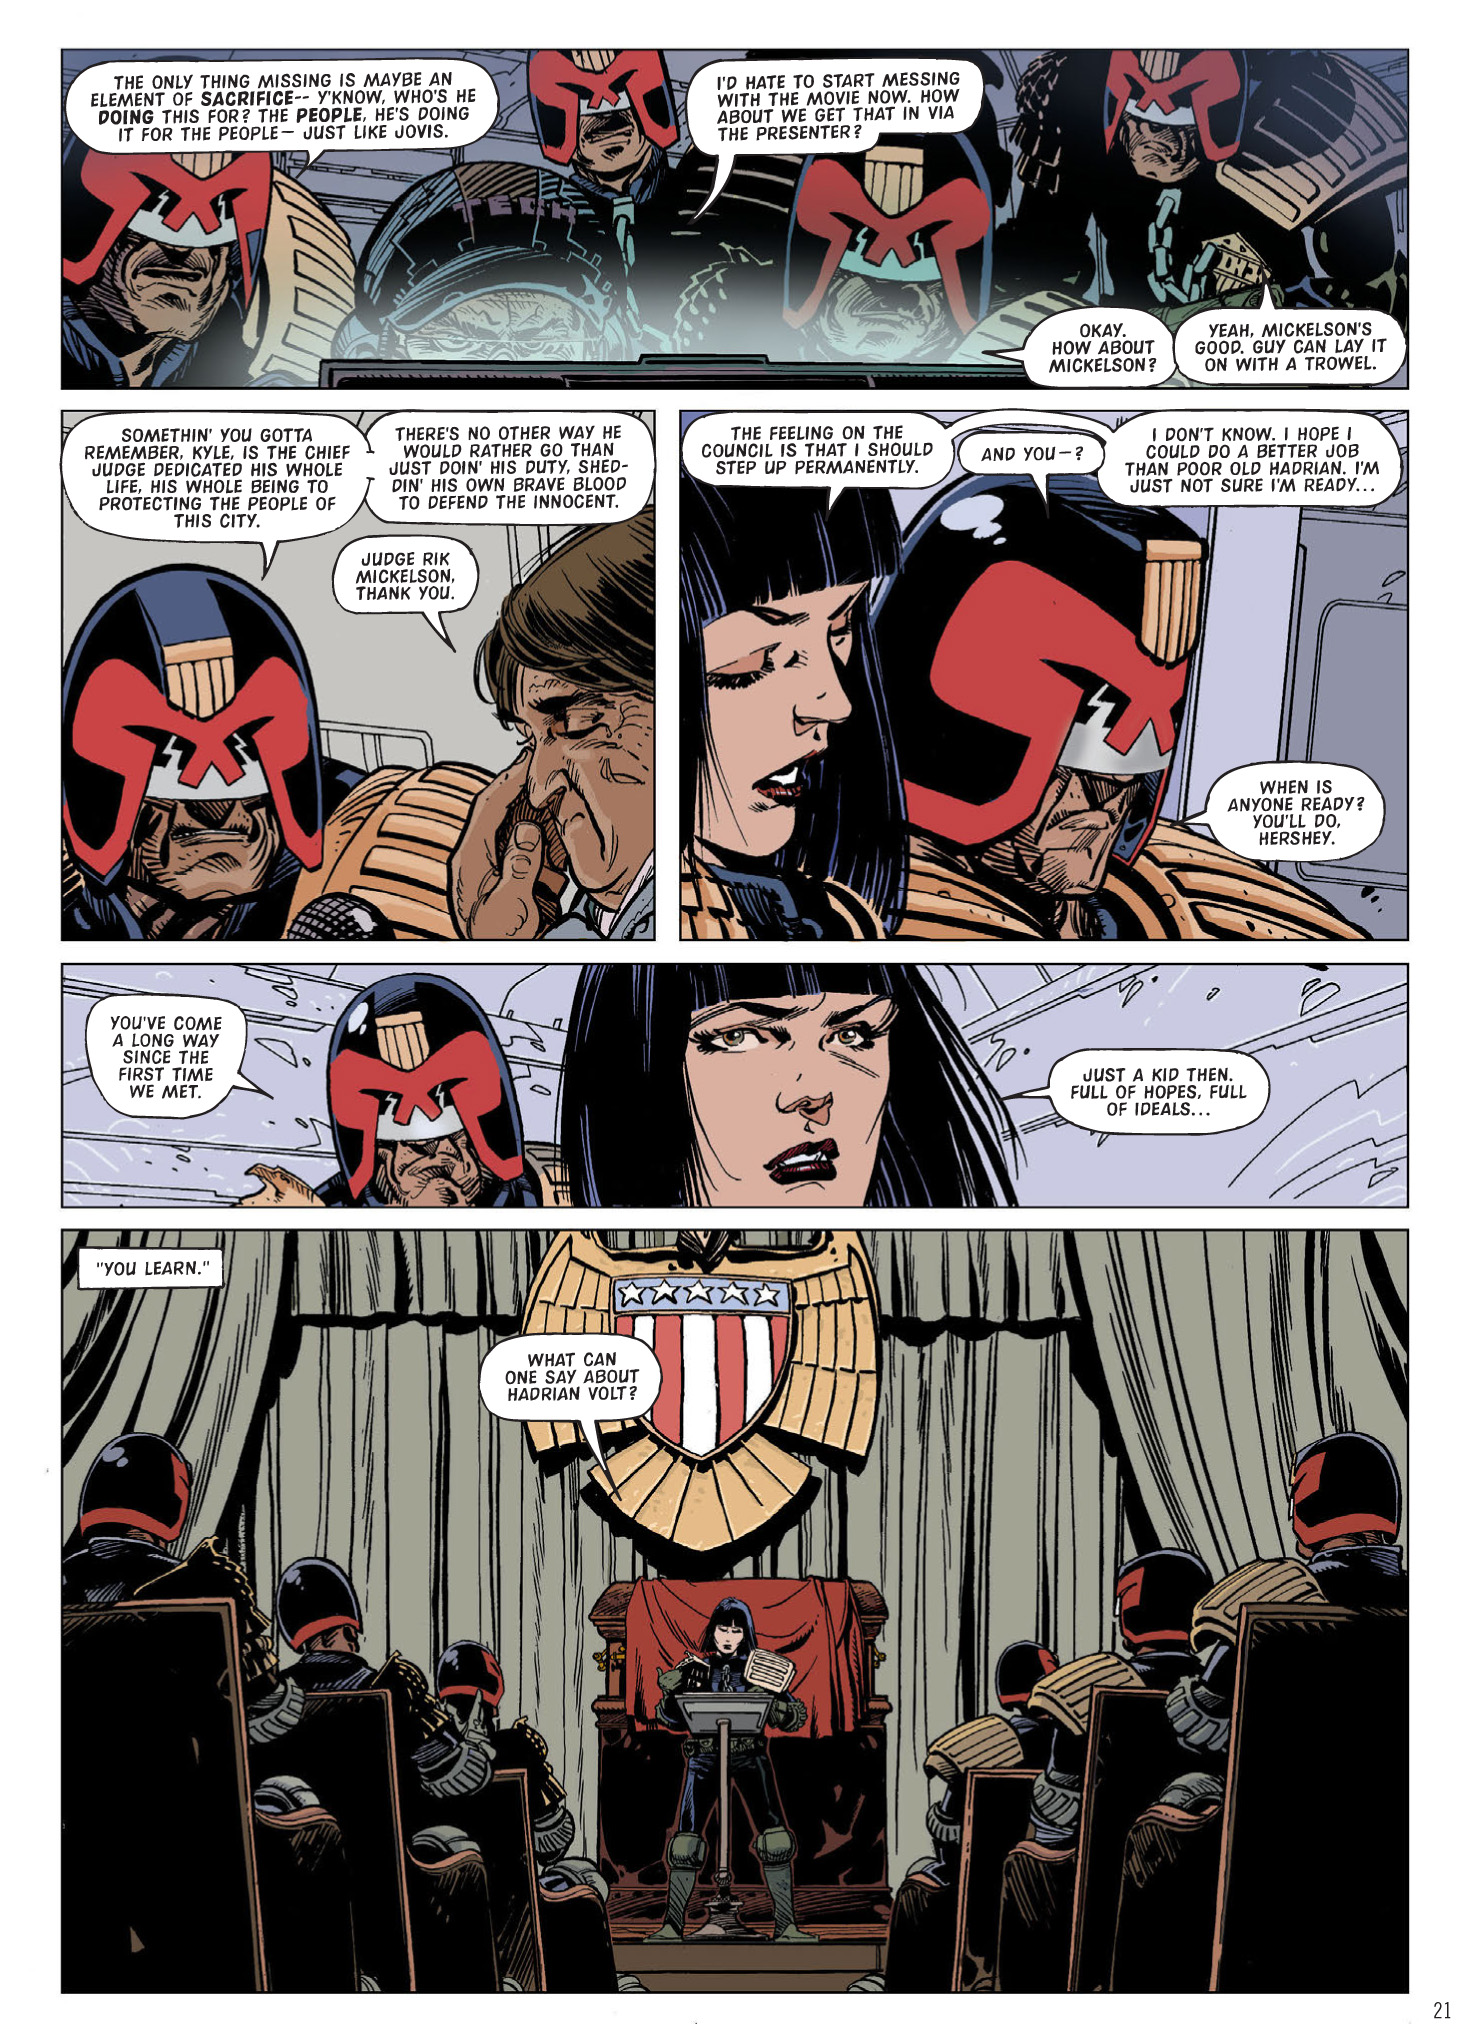 Read online Judge Dredd: The Complete Case Files comic -  Issue # TPB 31 - 22